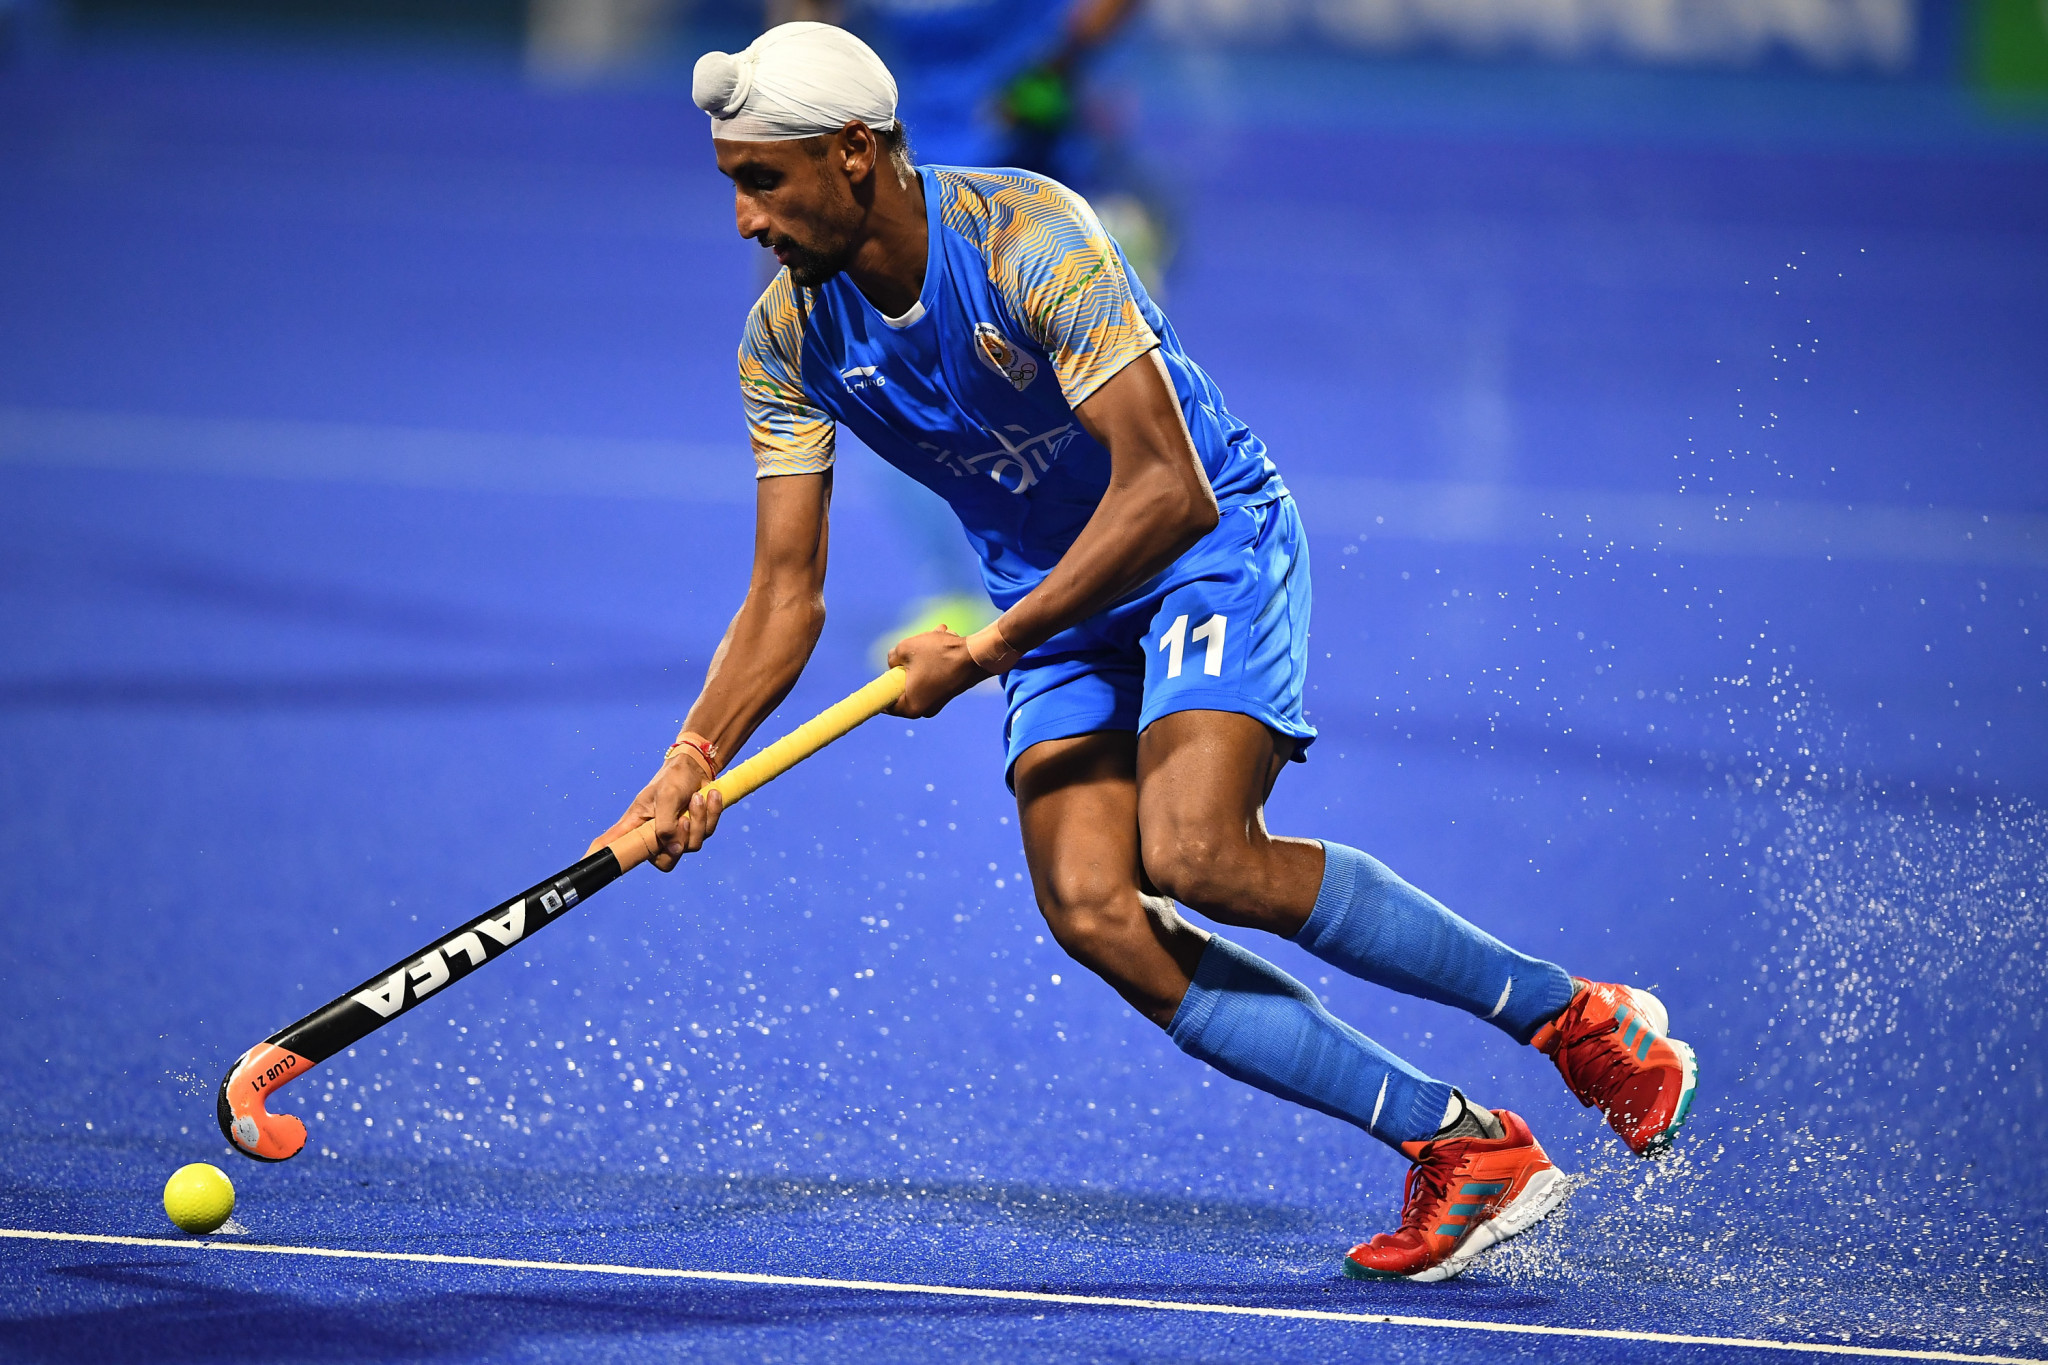 India thrash Japan to maintain strong start at Asian Hockey Champions Trophy